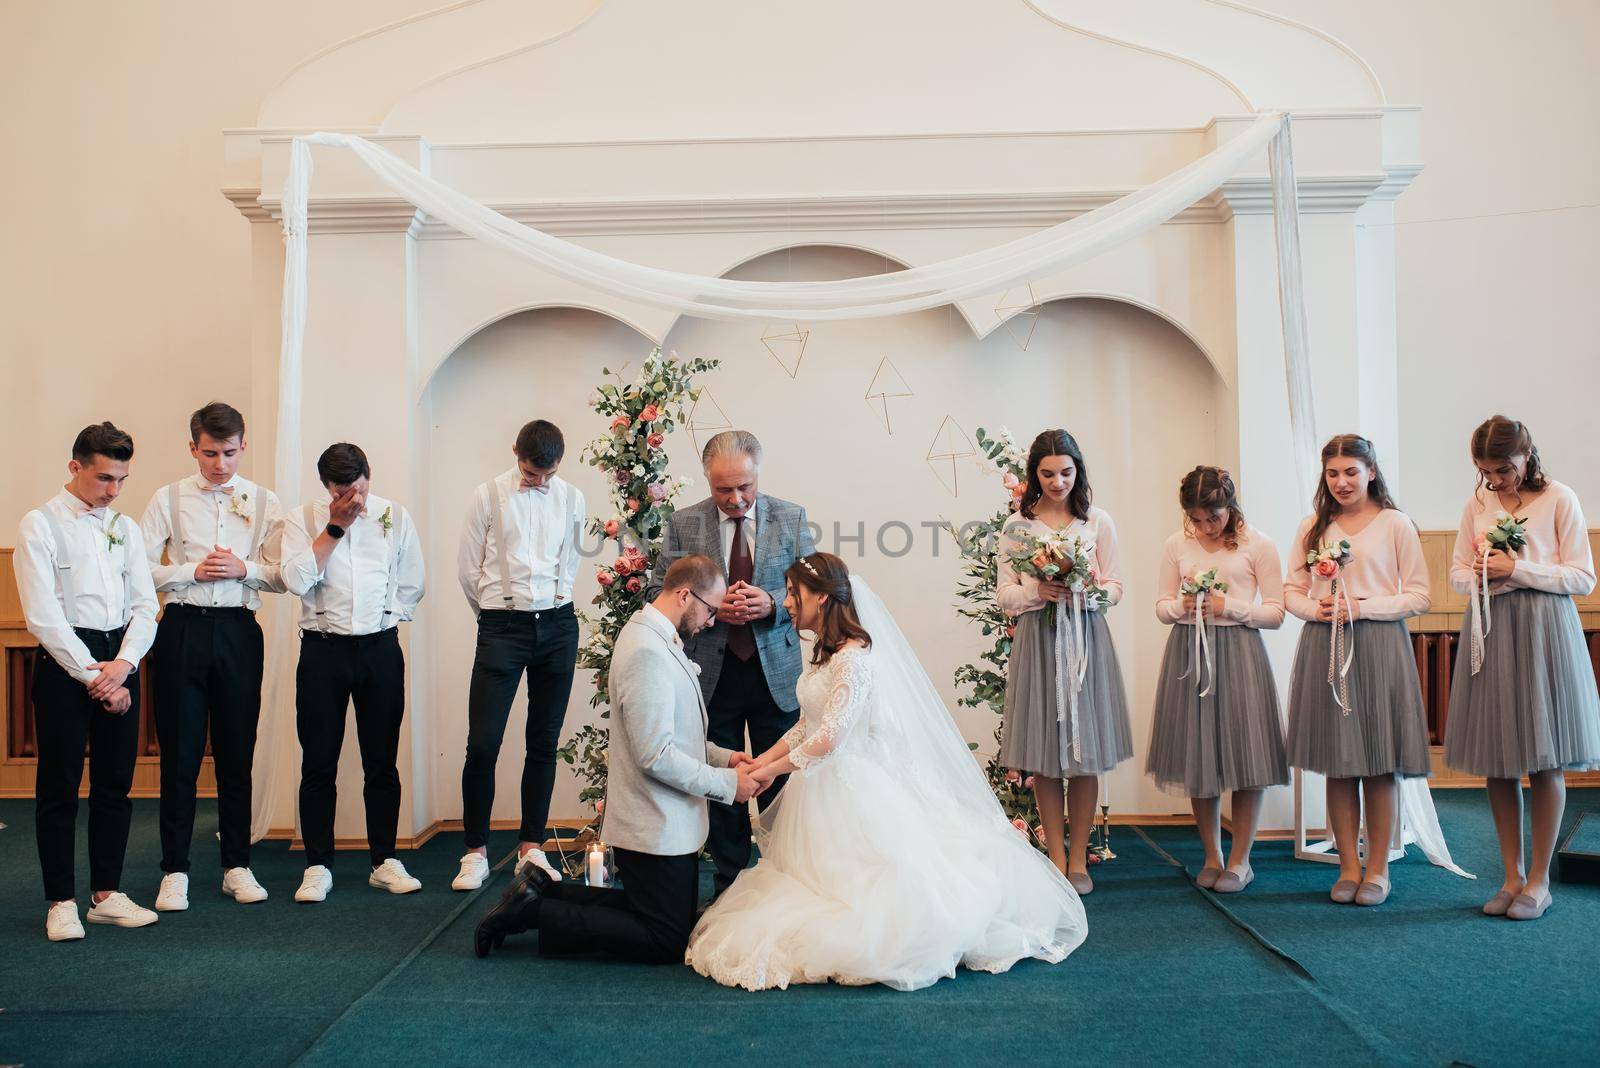 SACRAMENTO, USA - MAY 12 th 2018: Bride and groom pray and receive blessings in the church building.